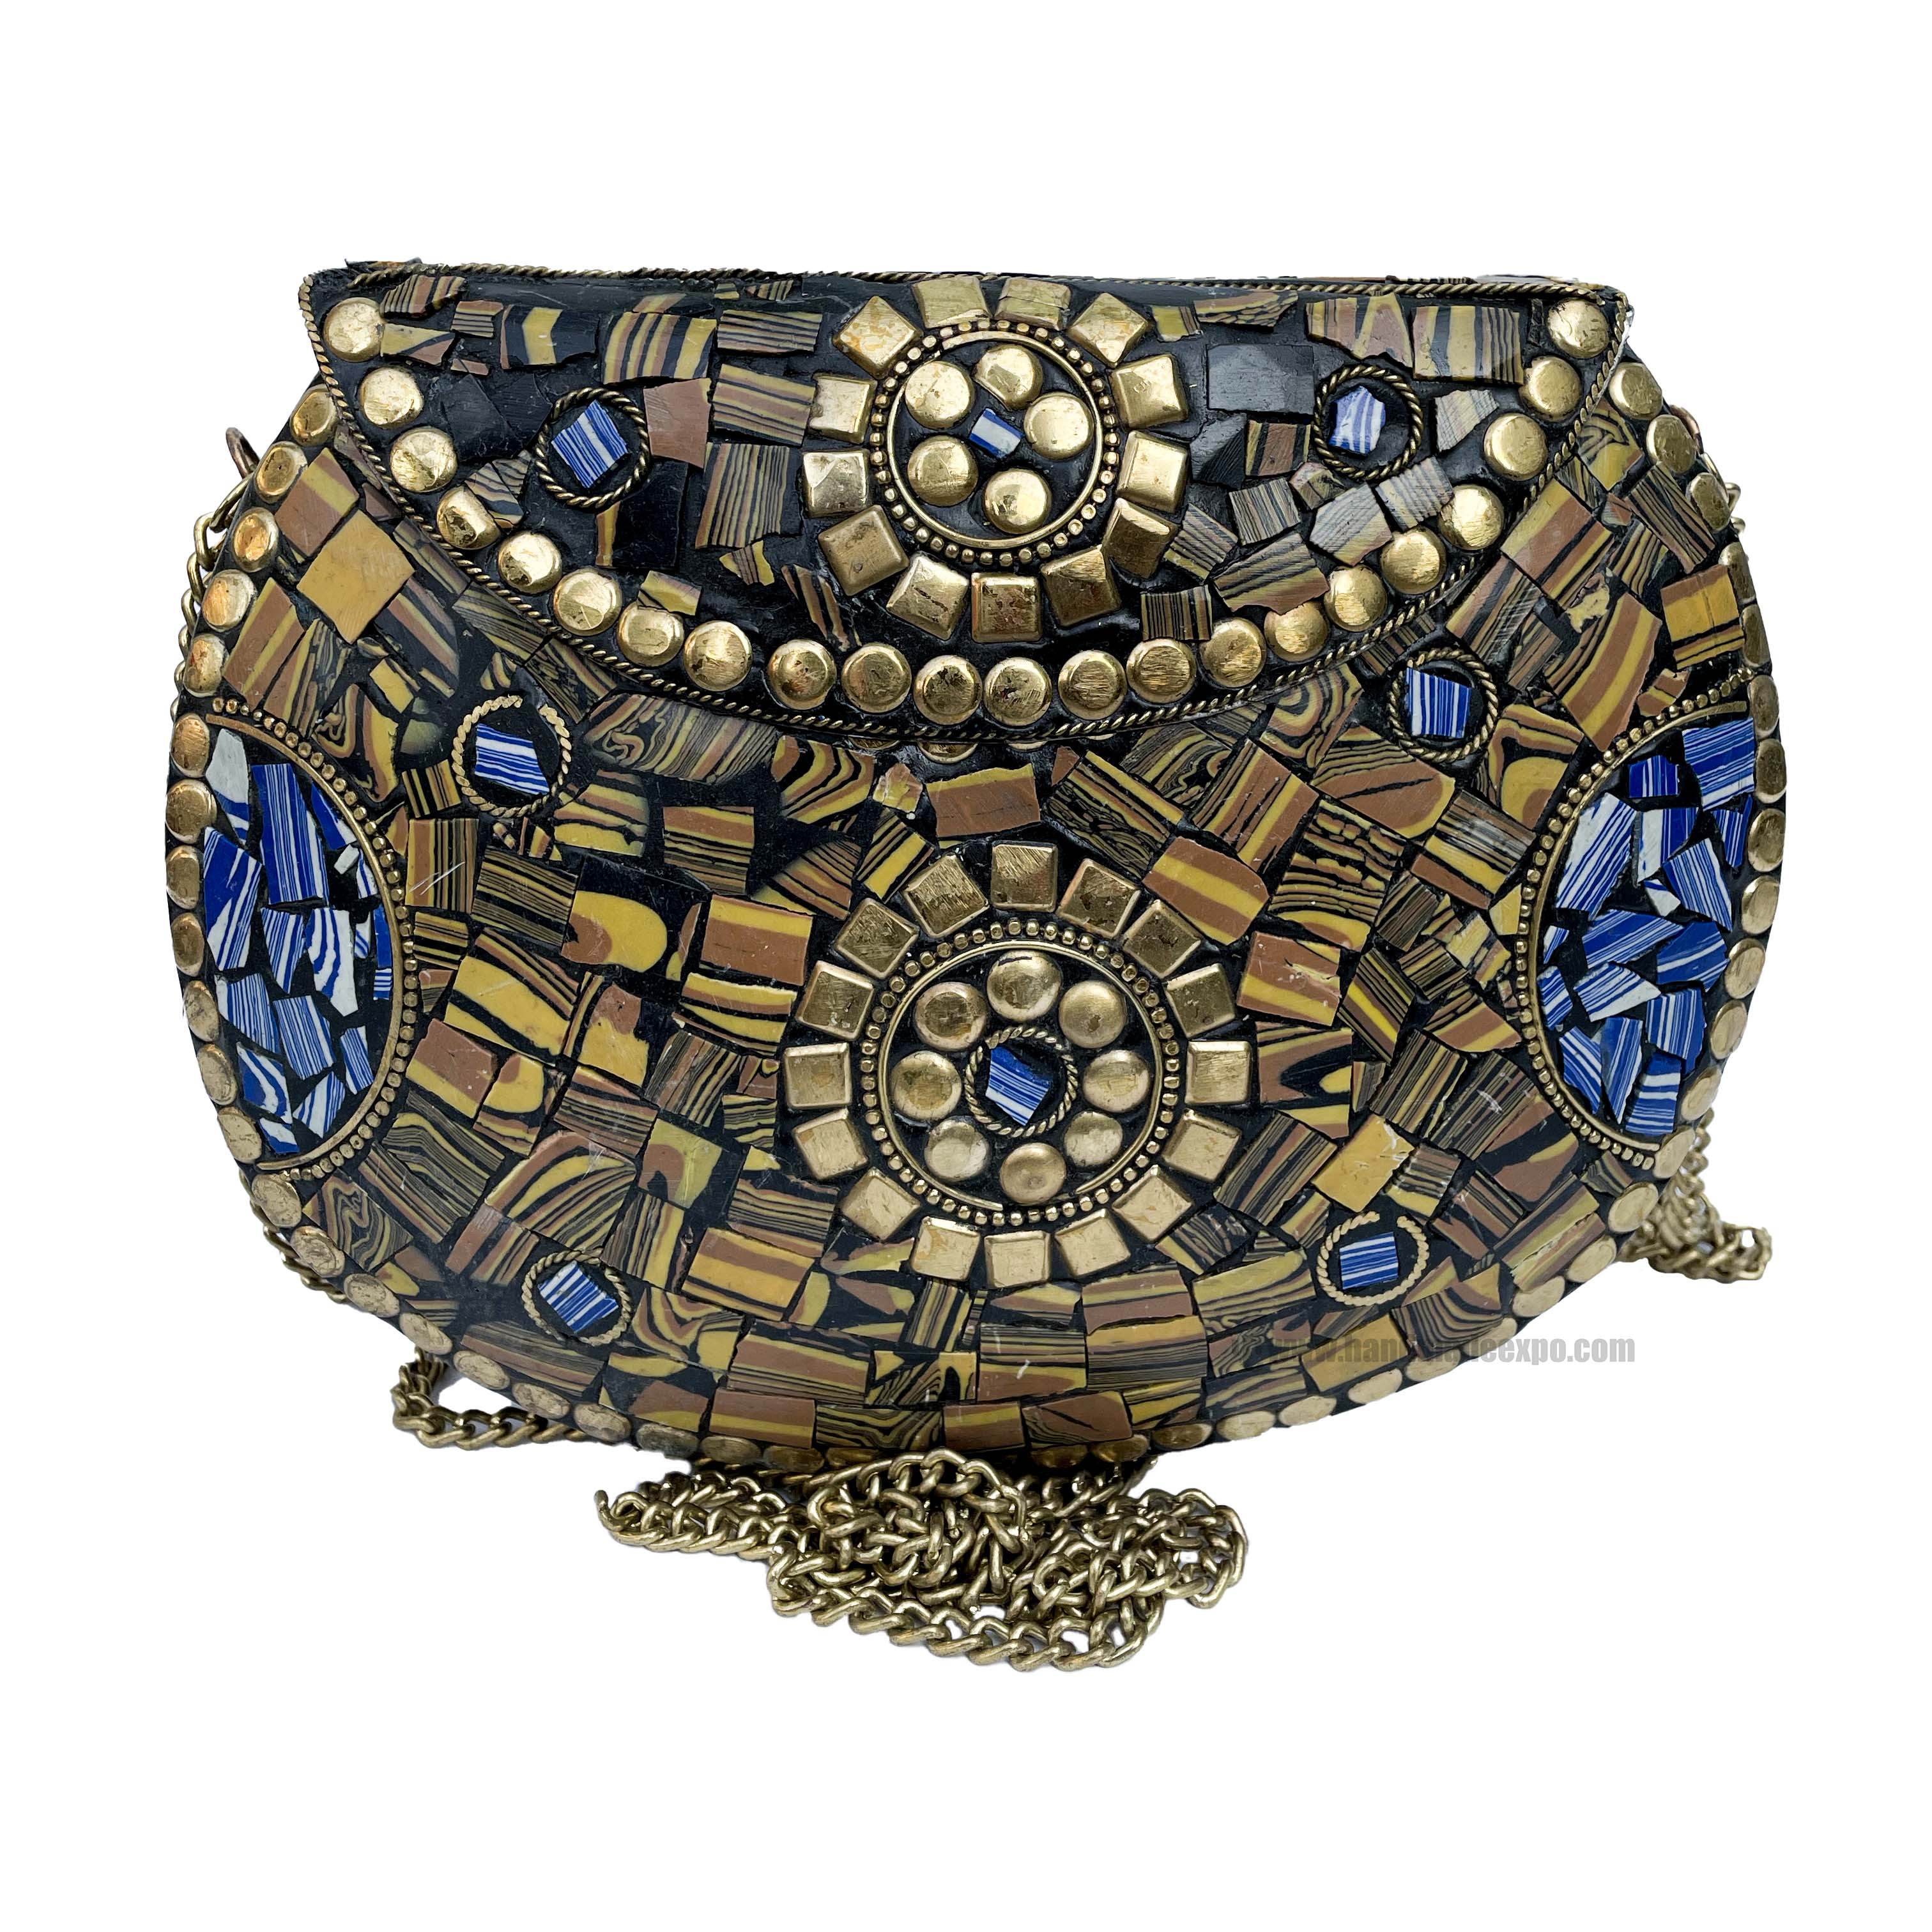 Nepali Handmade Big Ladies Bag With stone Setting, metal, golden And Blue Color